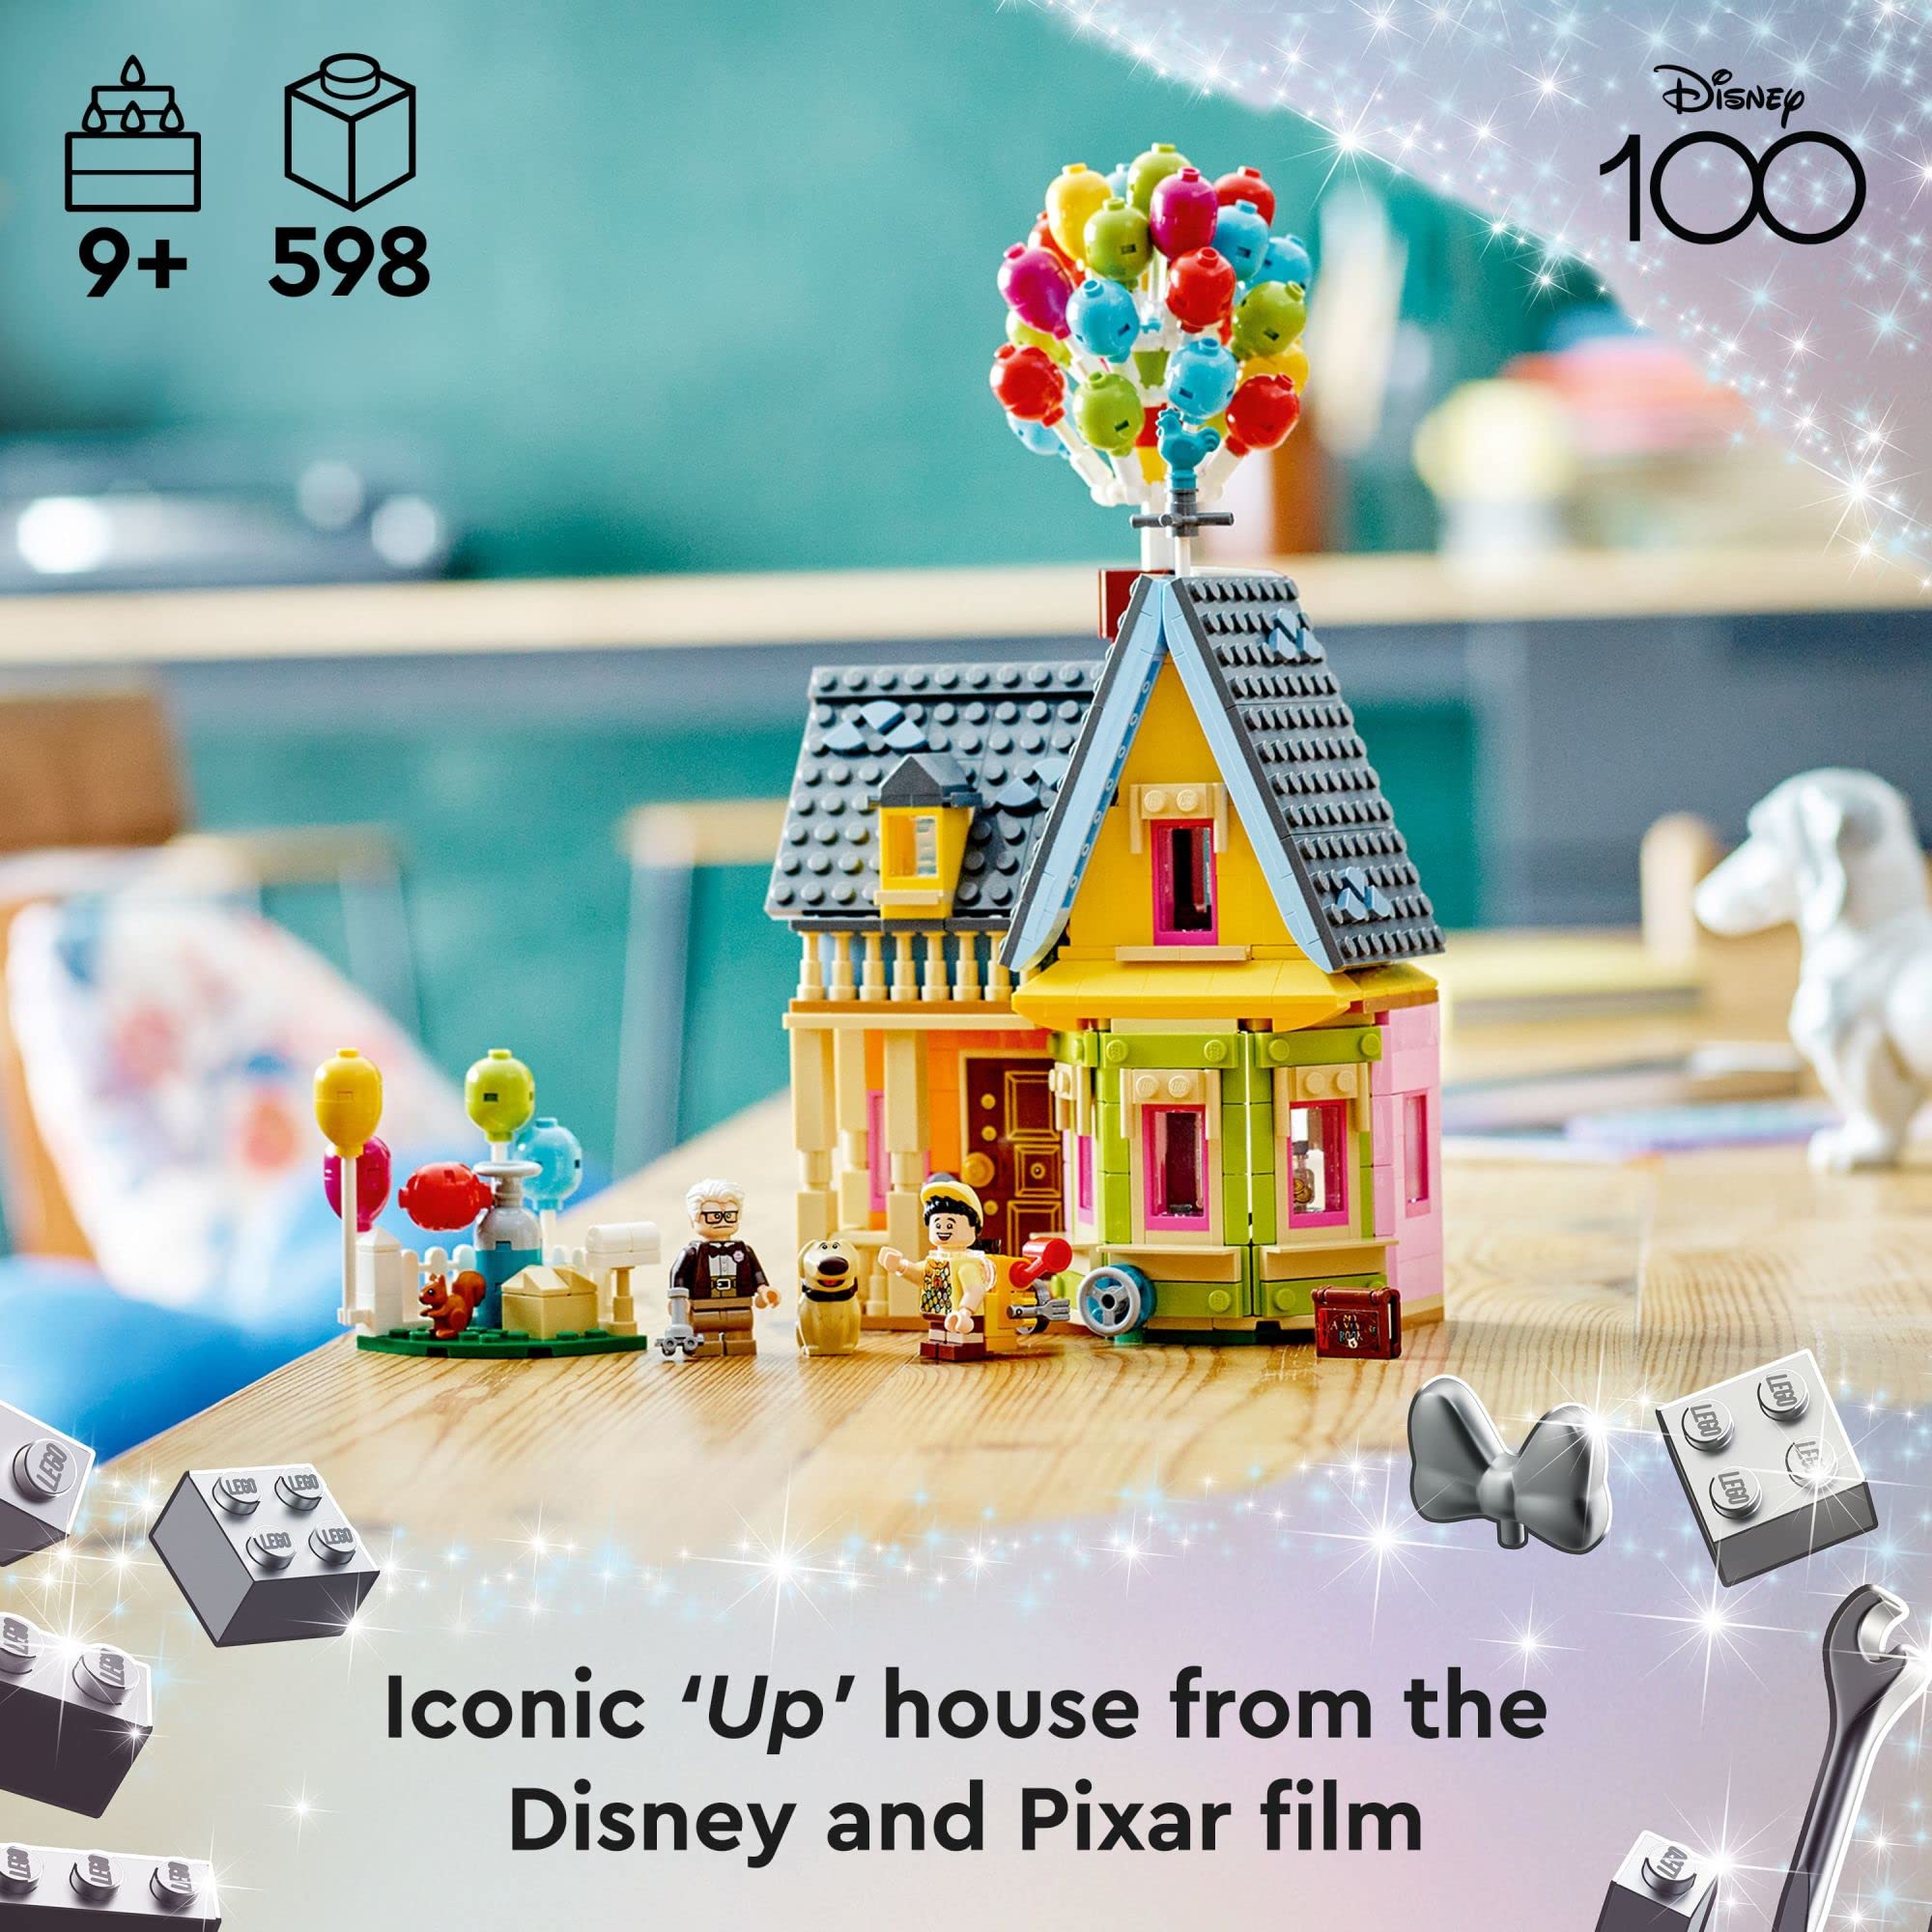 LEGO Disney and Pixar ‘Up’ House 43217 Disney 100 Anniversary Celebration Building Toy Set for Kids and Movie Fans Ages 9+, A Fun Gift for Anyone who Loves Disney